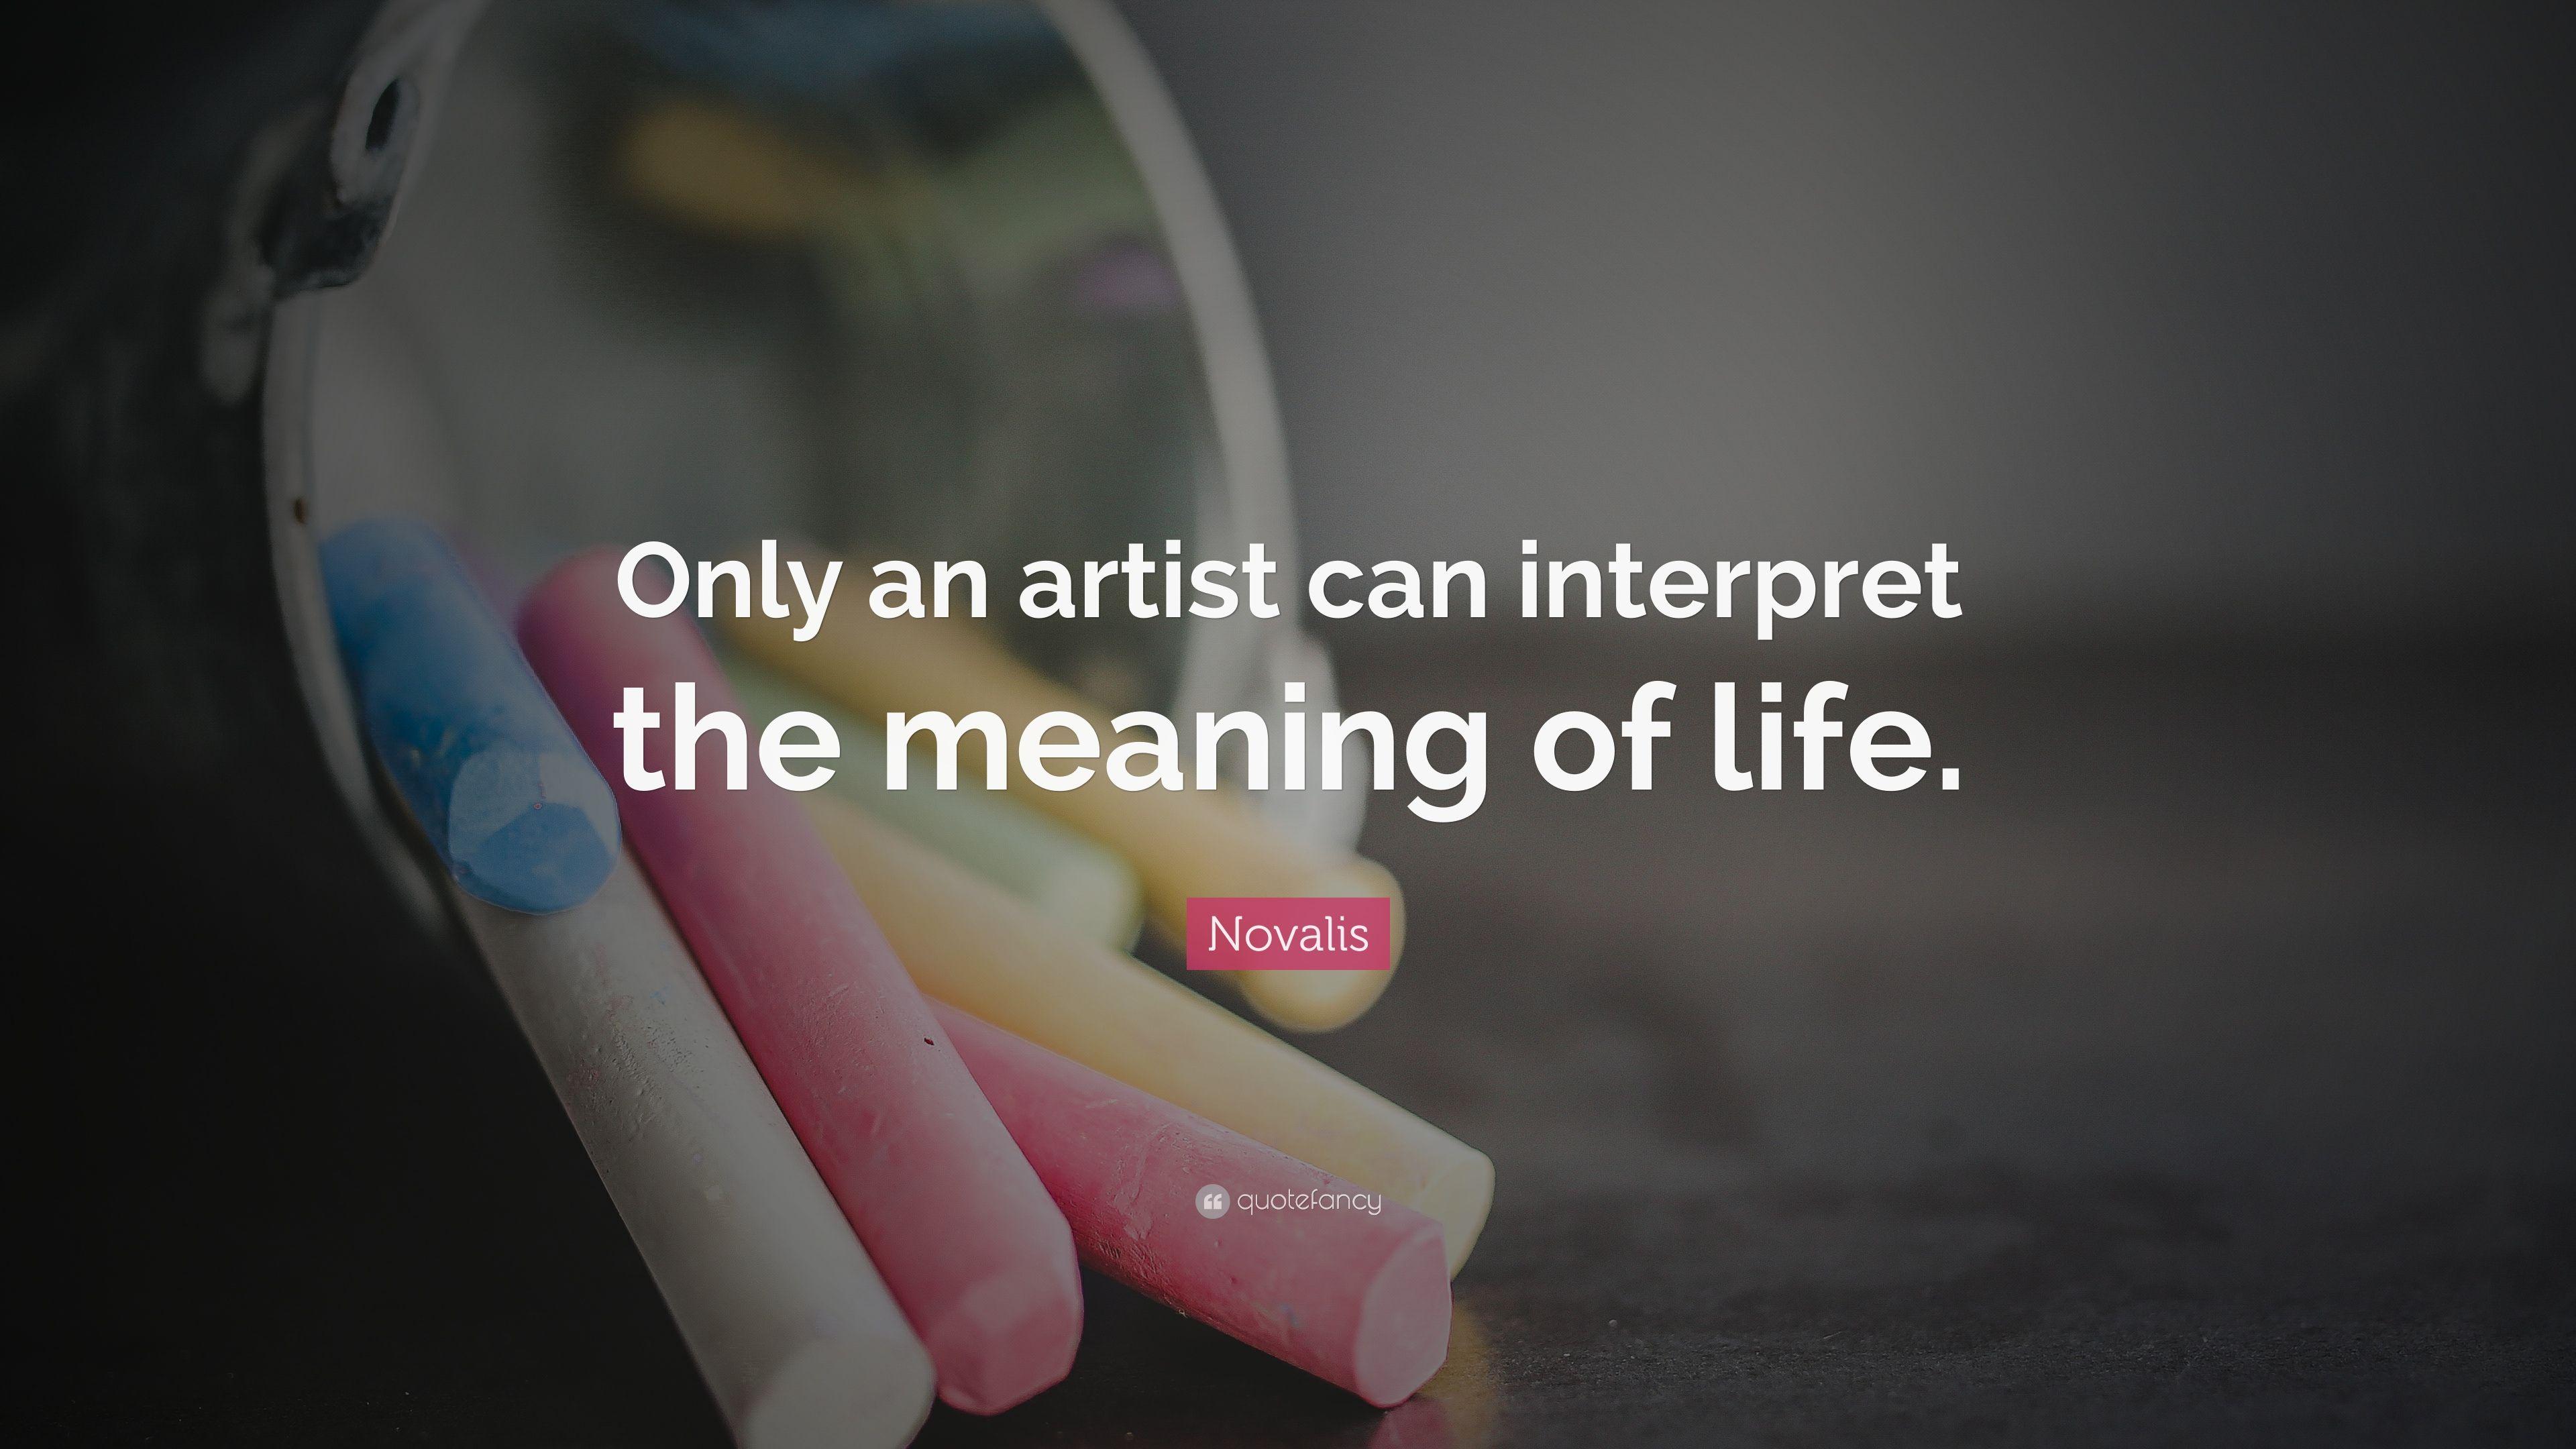 Novalis Quote: “Only an artist can interpret the meaning of life